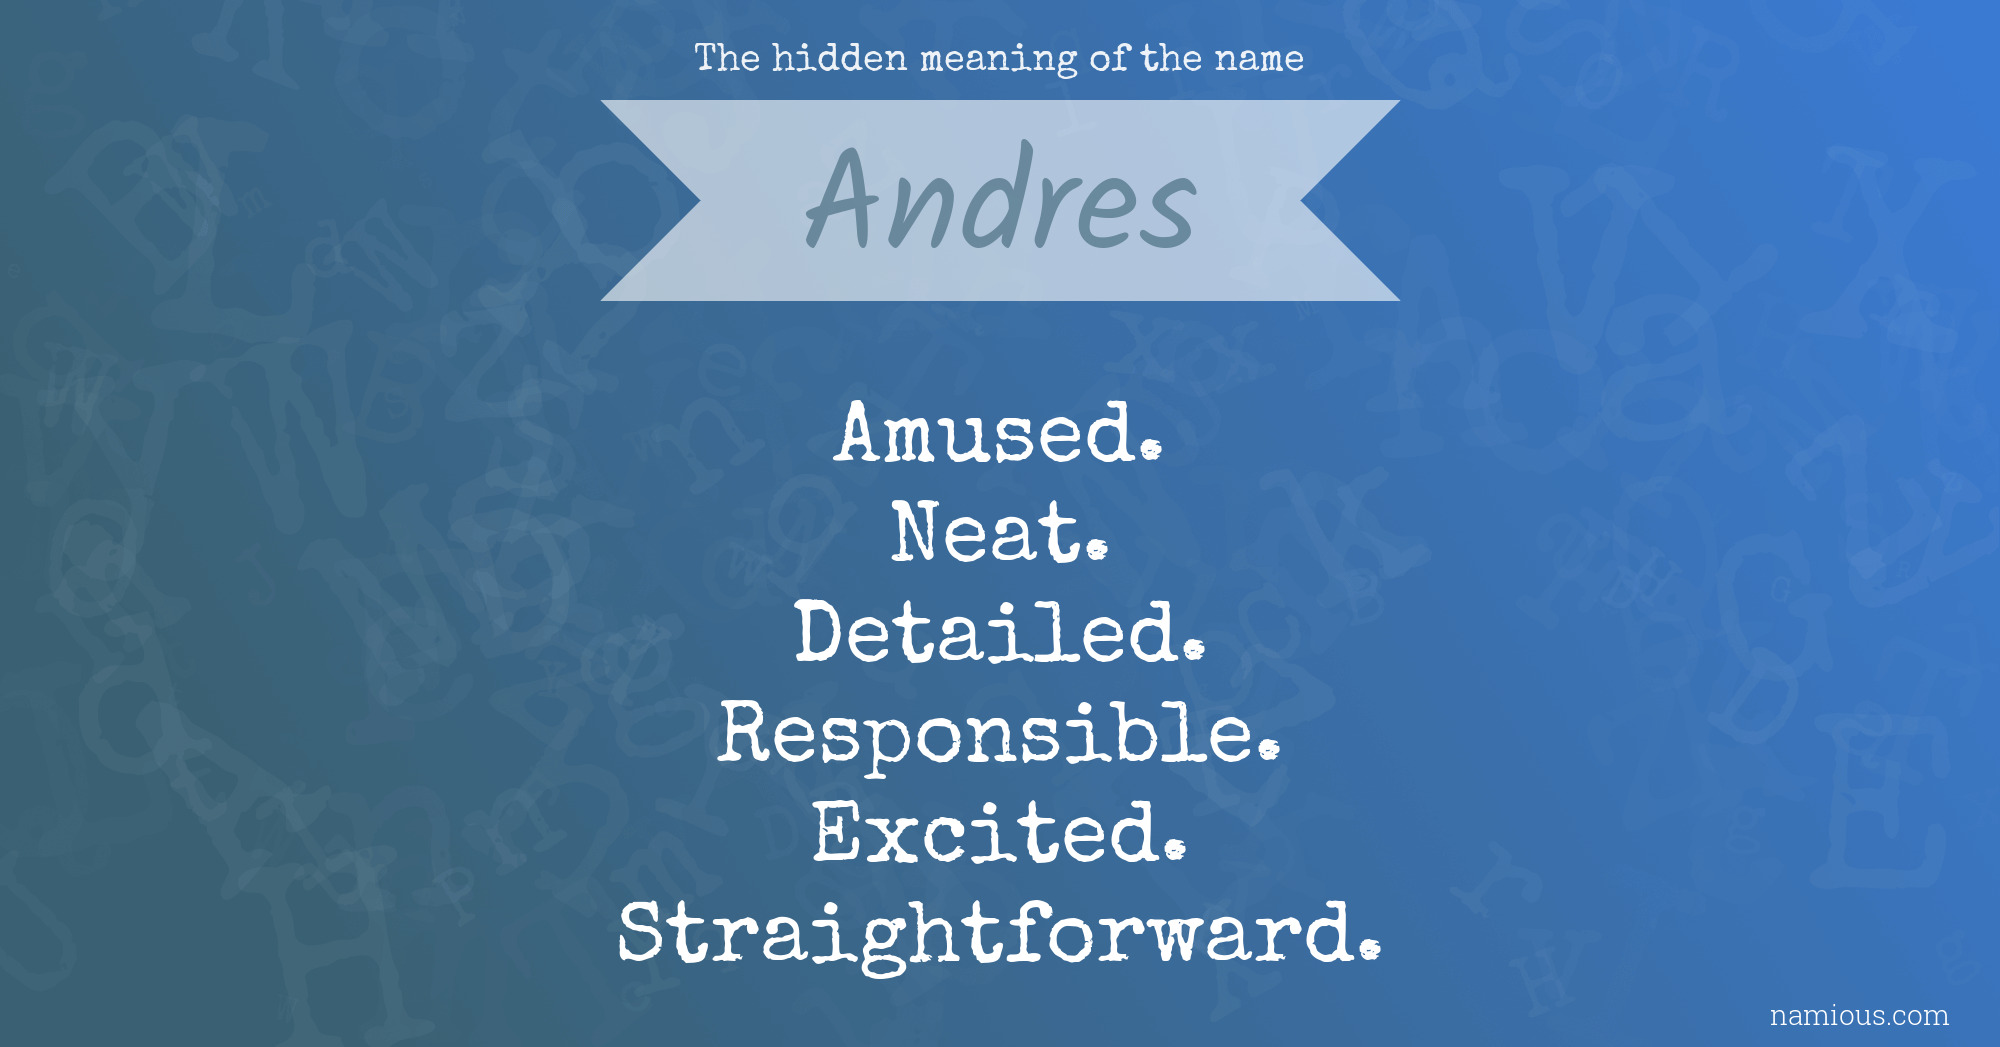 The hidden meaning of the name Andres